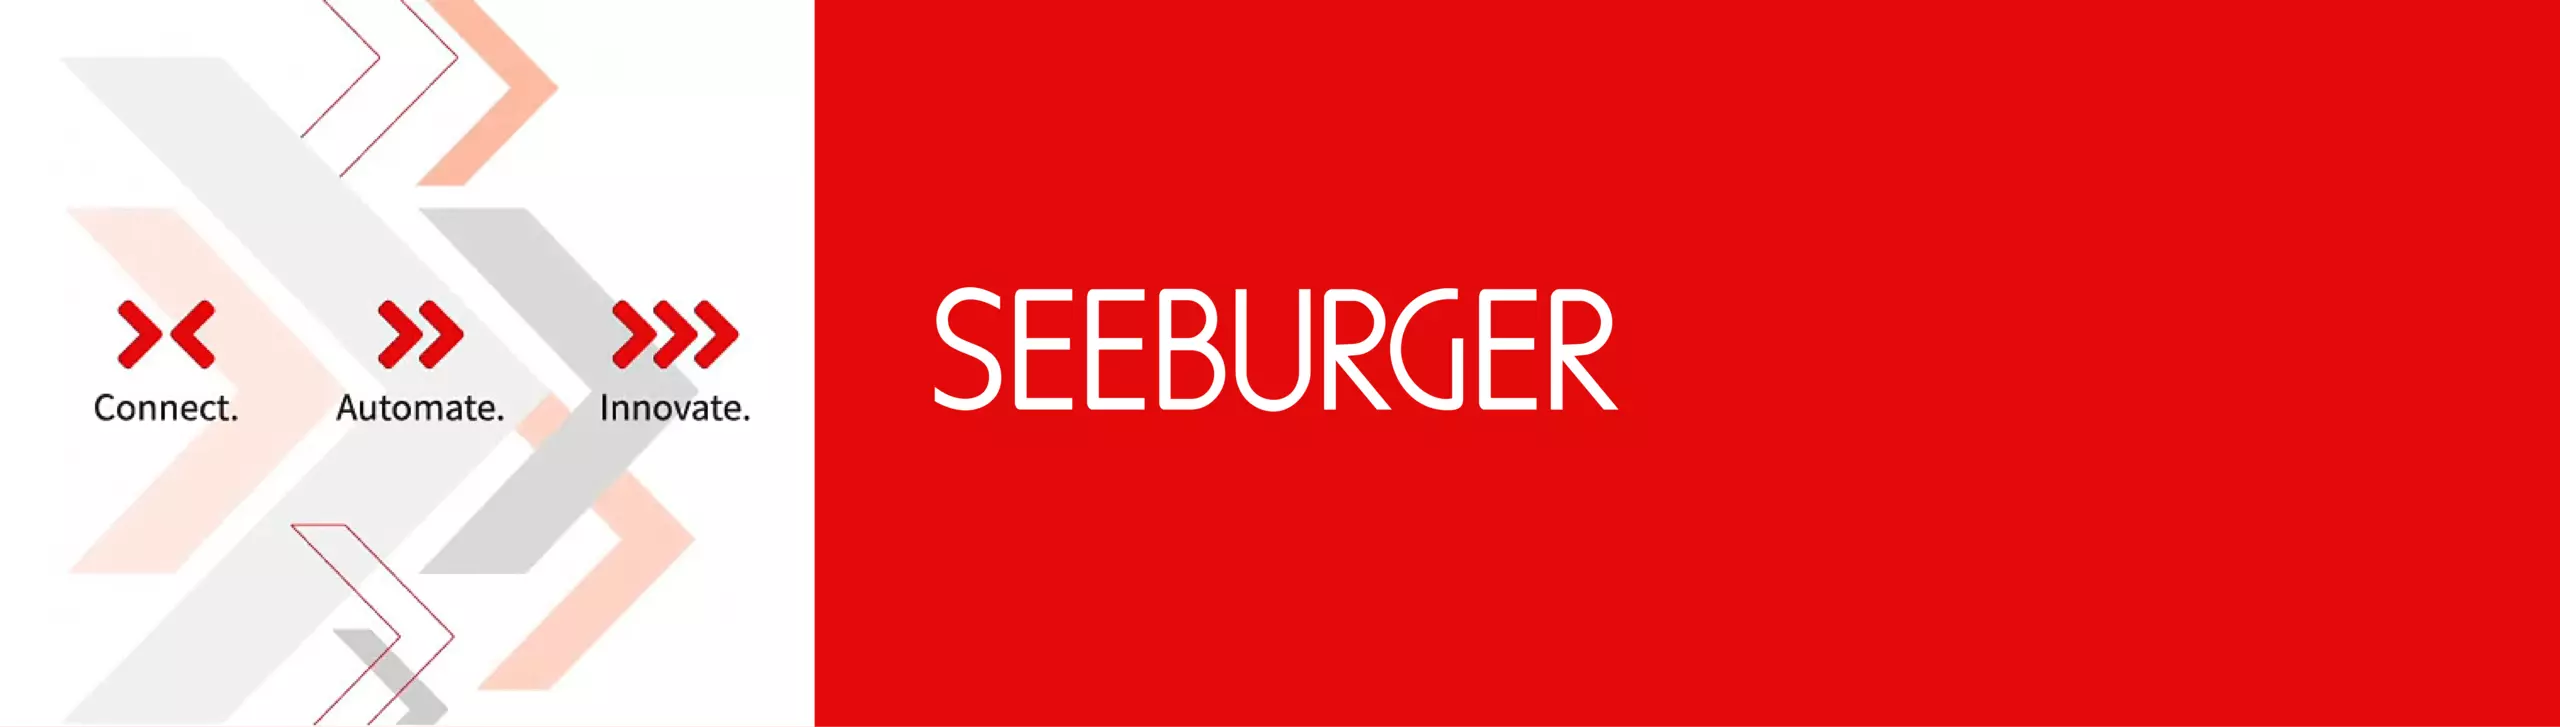 Why mobile-first is so important for Seeburger